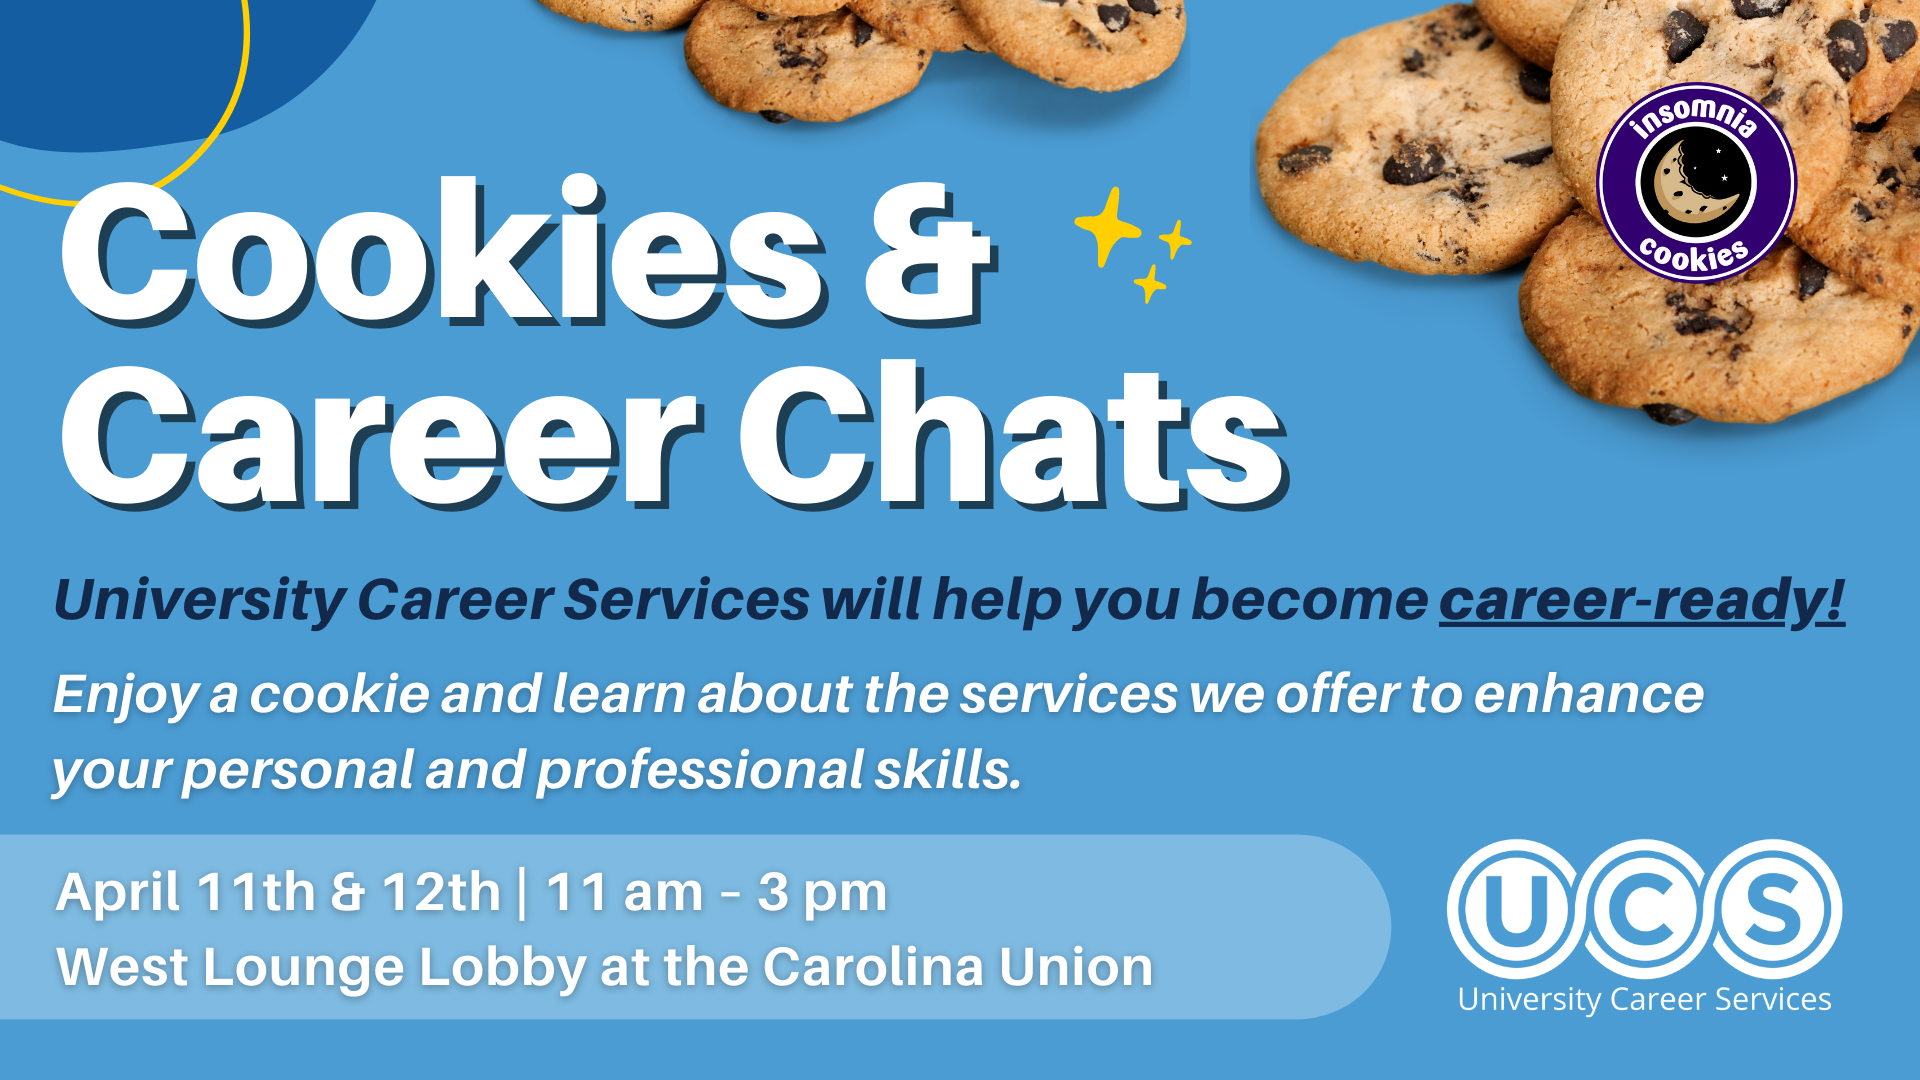 Enjoy a cookie and learn about the services we offer to enhance your personal and professional skills.